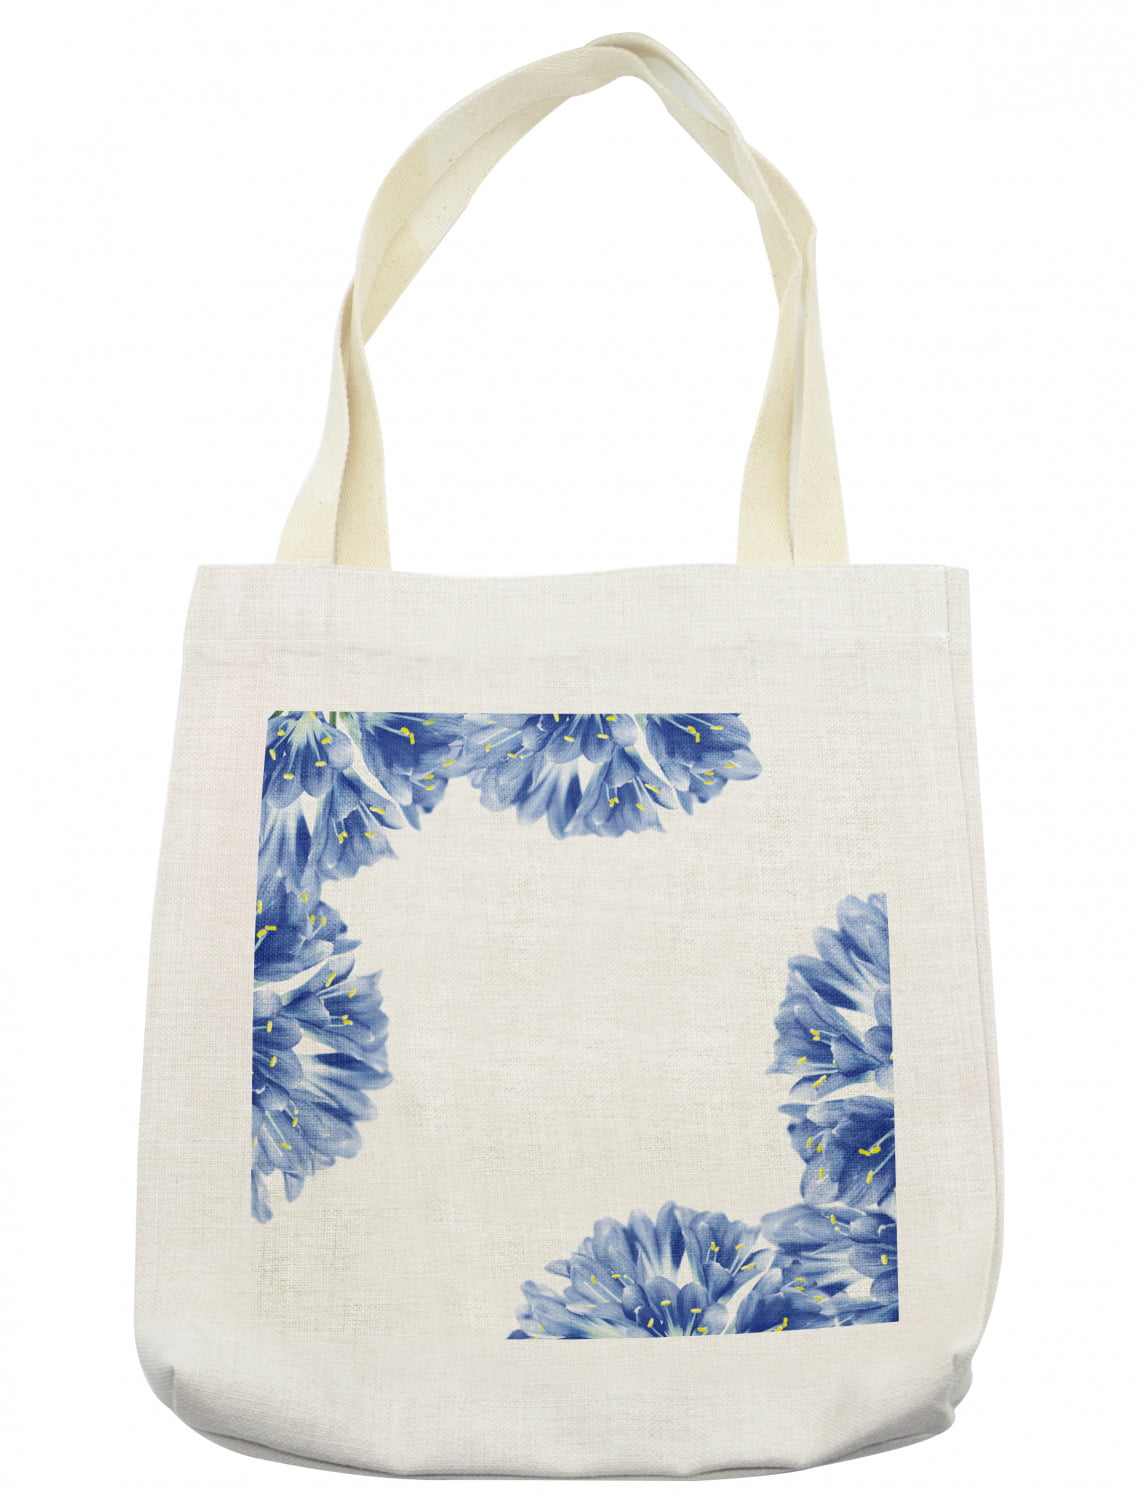 Vintage Style Floral Shopping Tote Bag Reusable Spring Bags Grocery Books Sale 